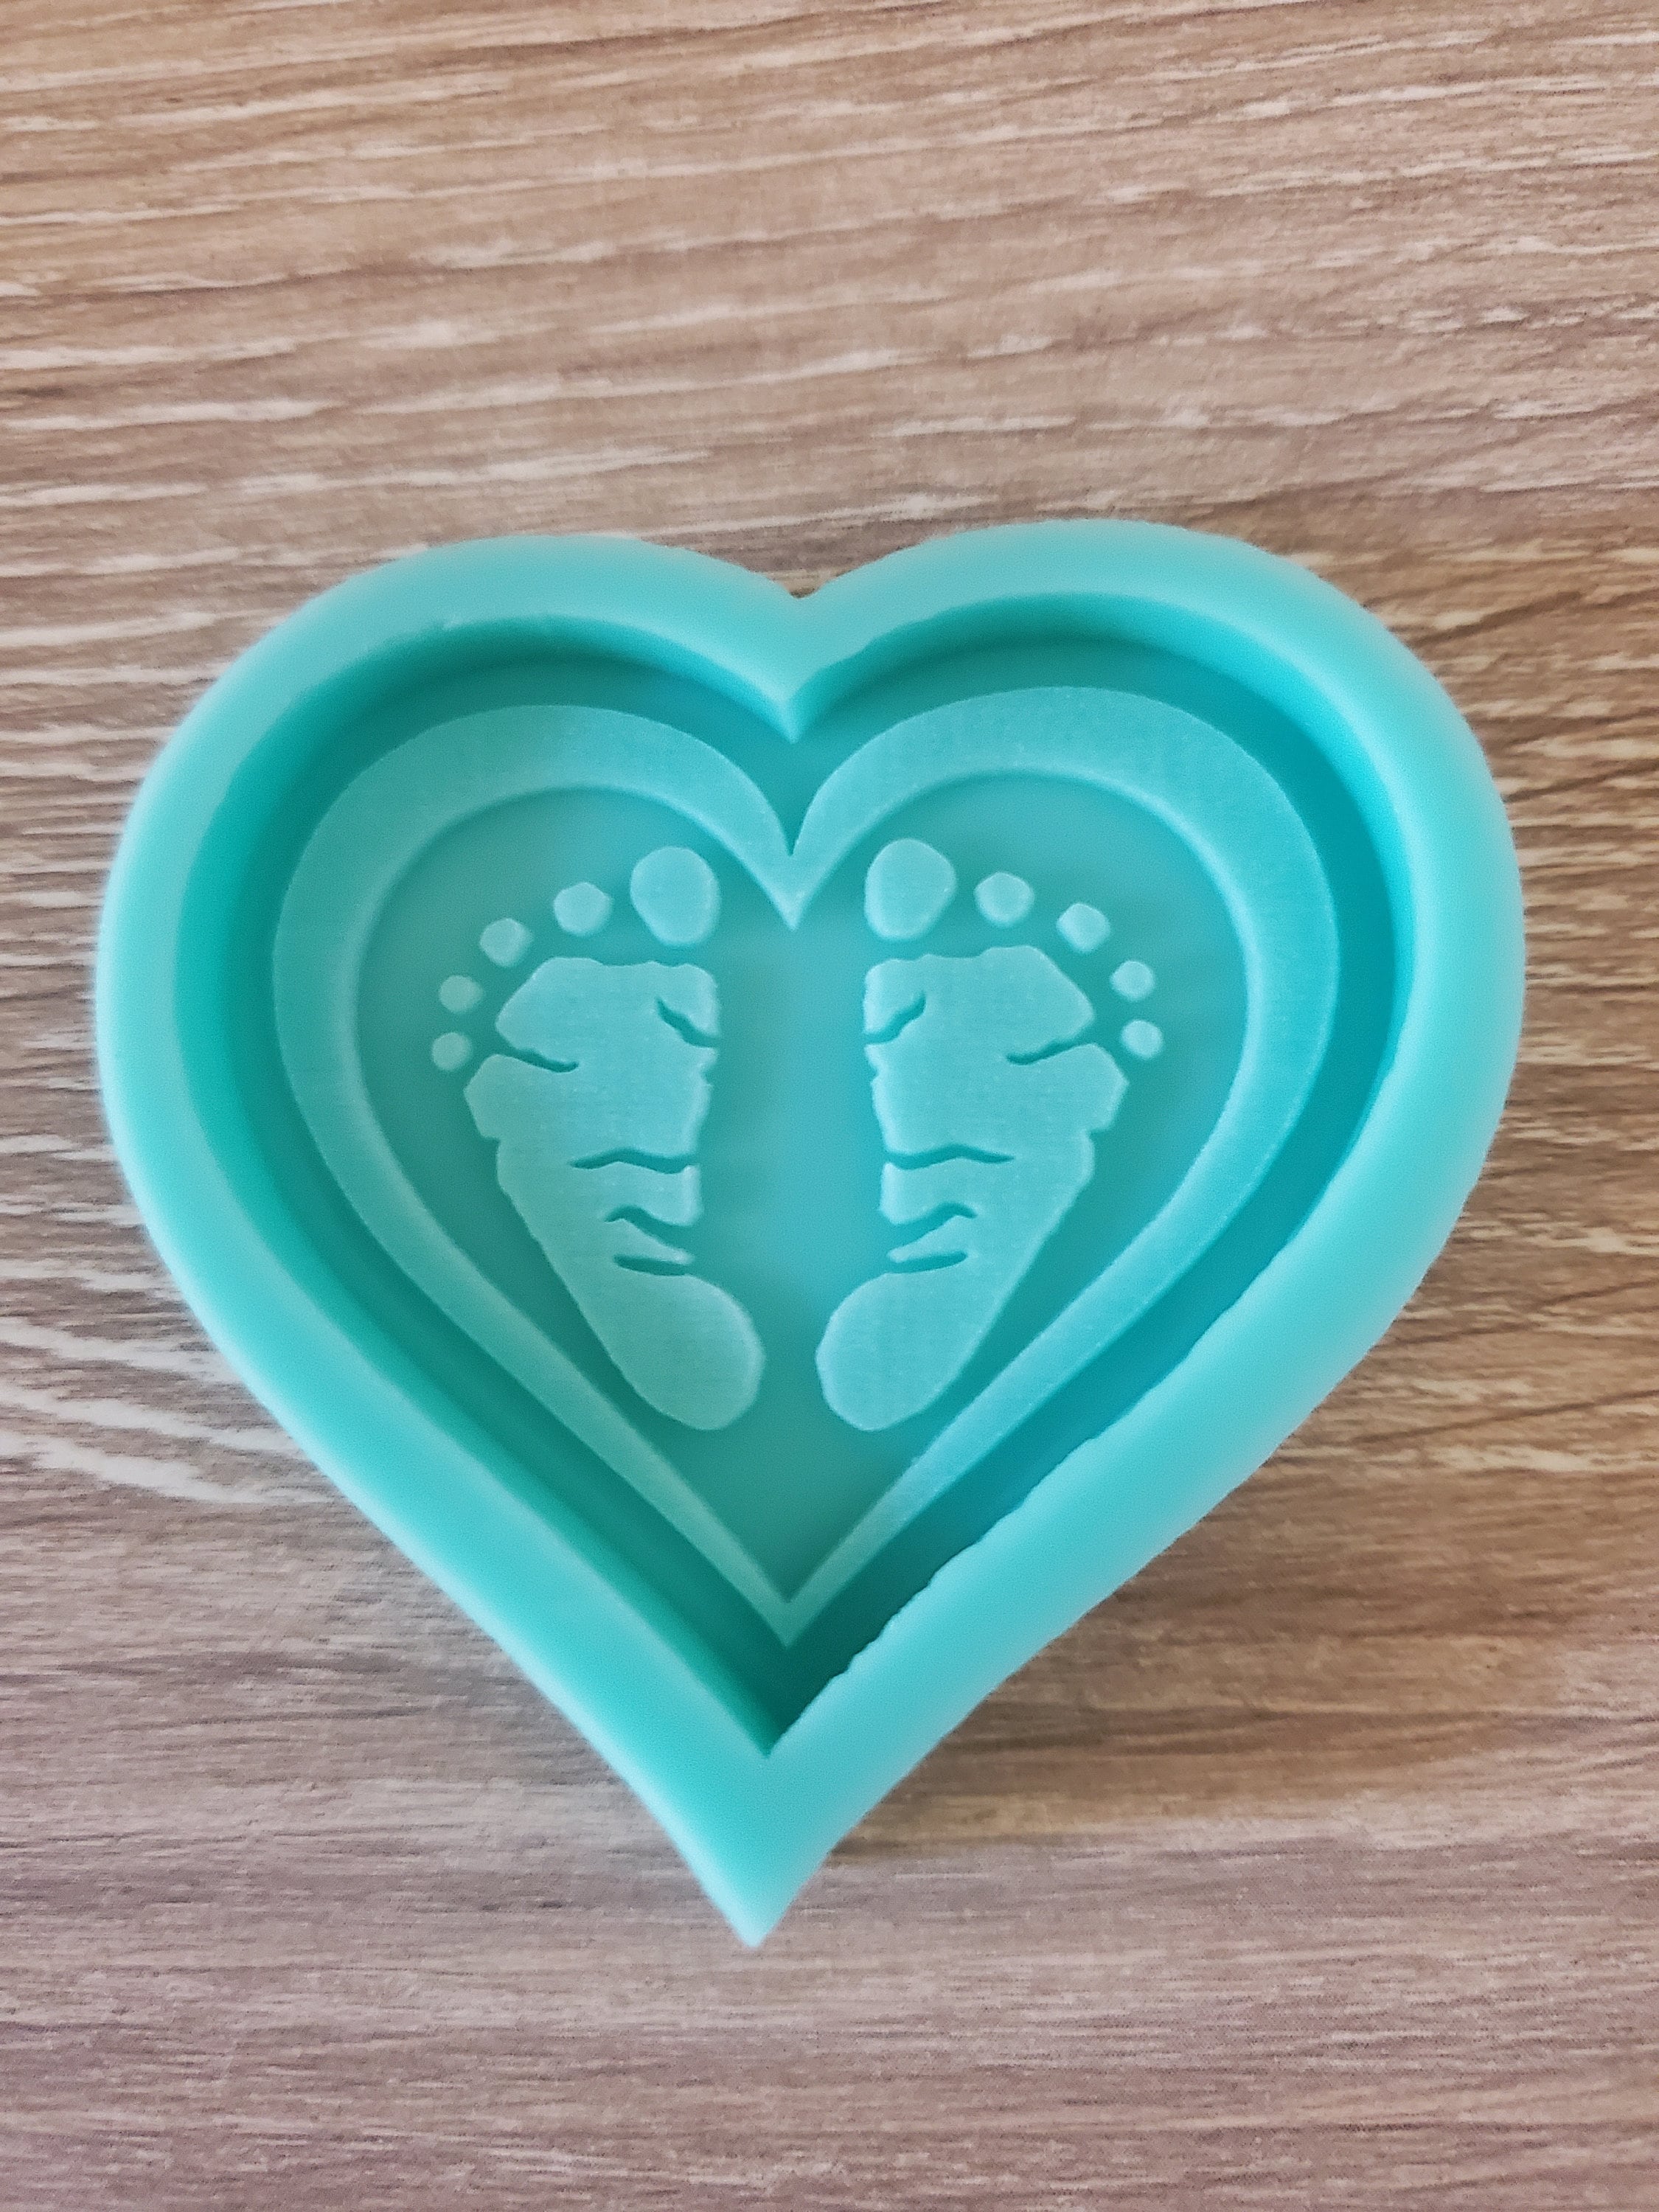 Love Hearts Silicone Molds Baby Feet Soap Mold Resin Making Crafts